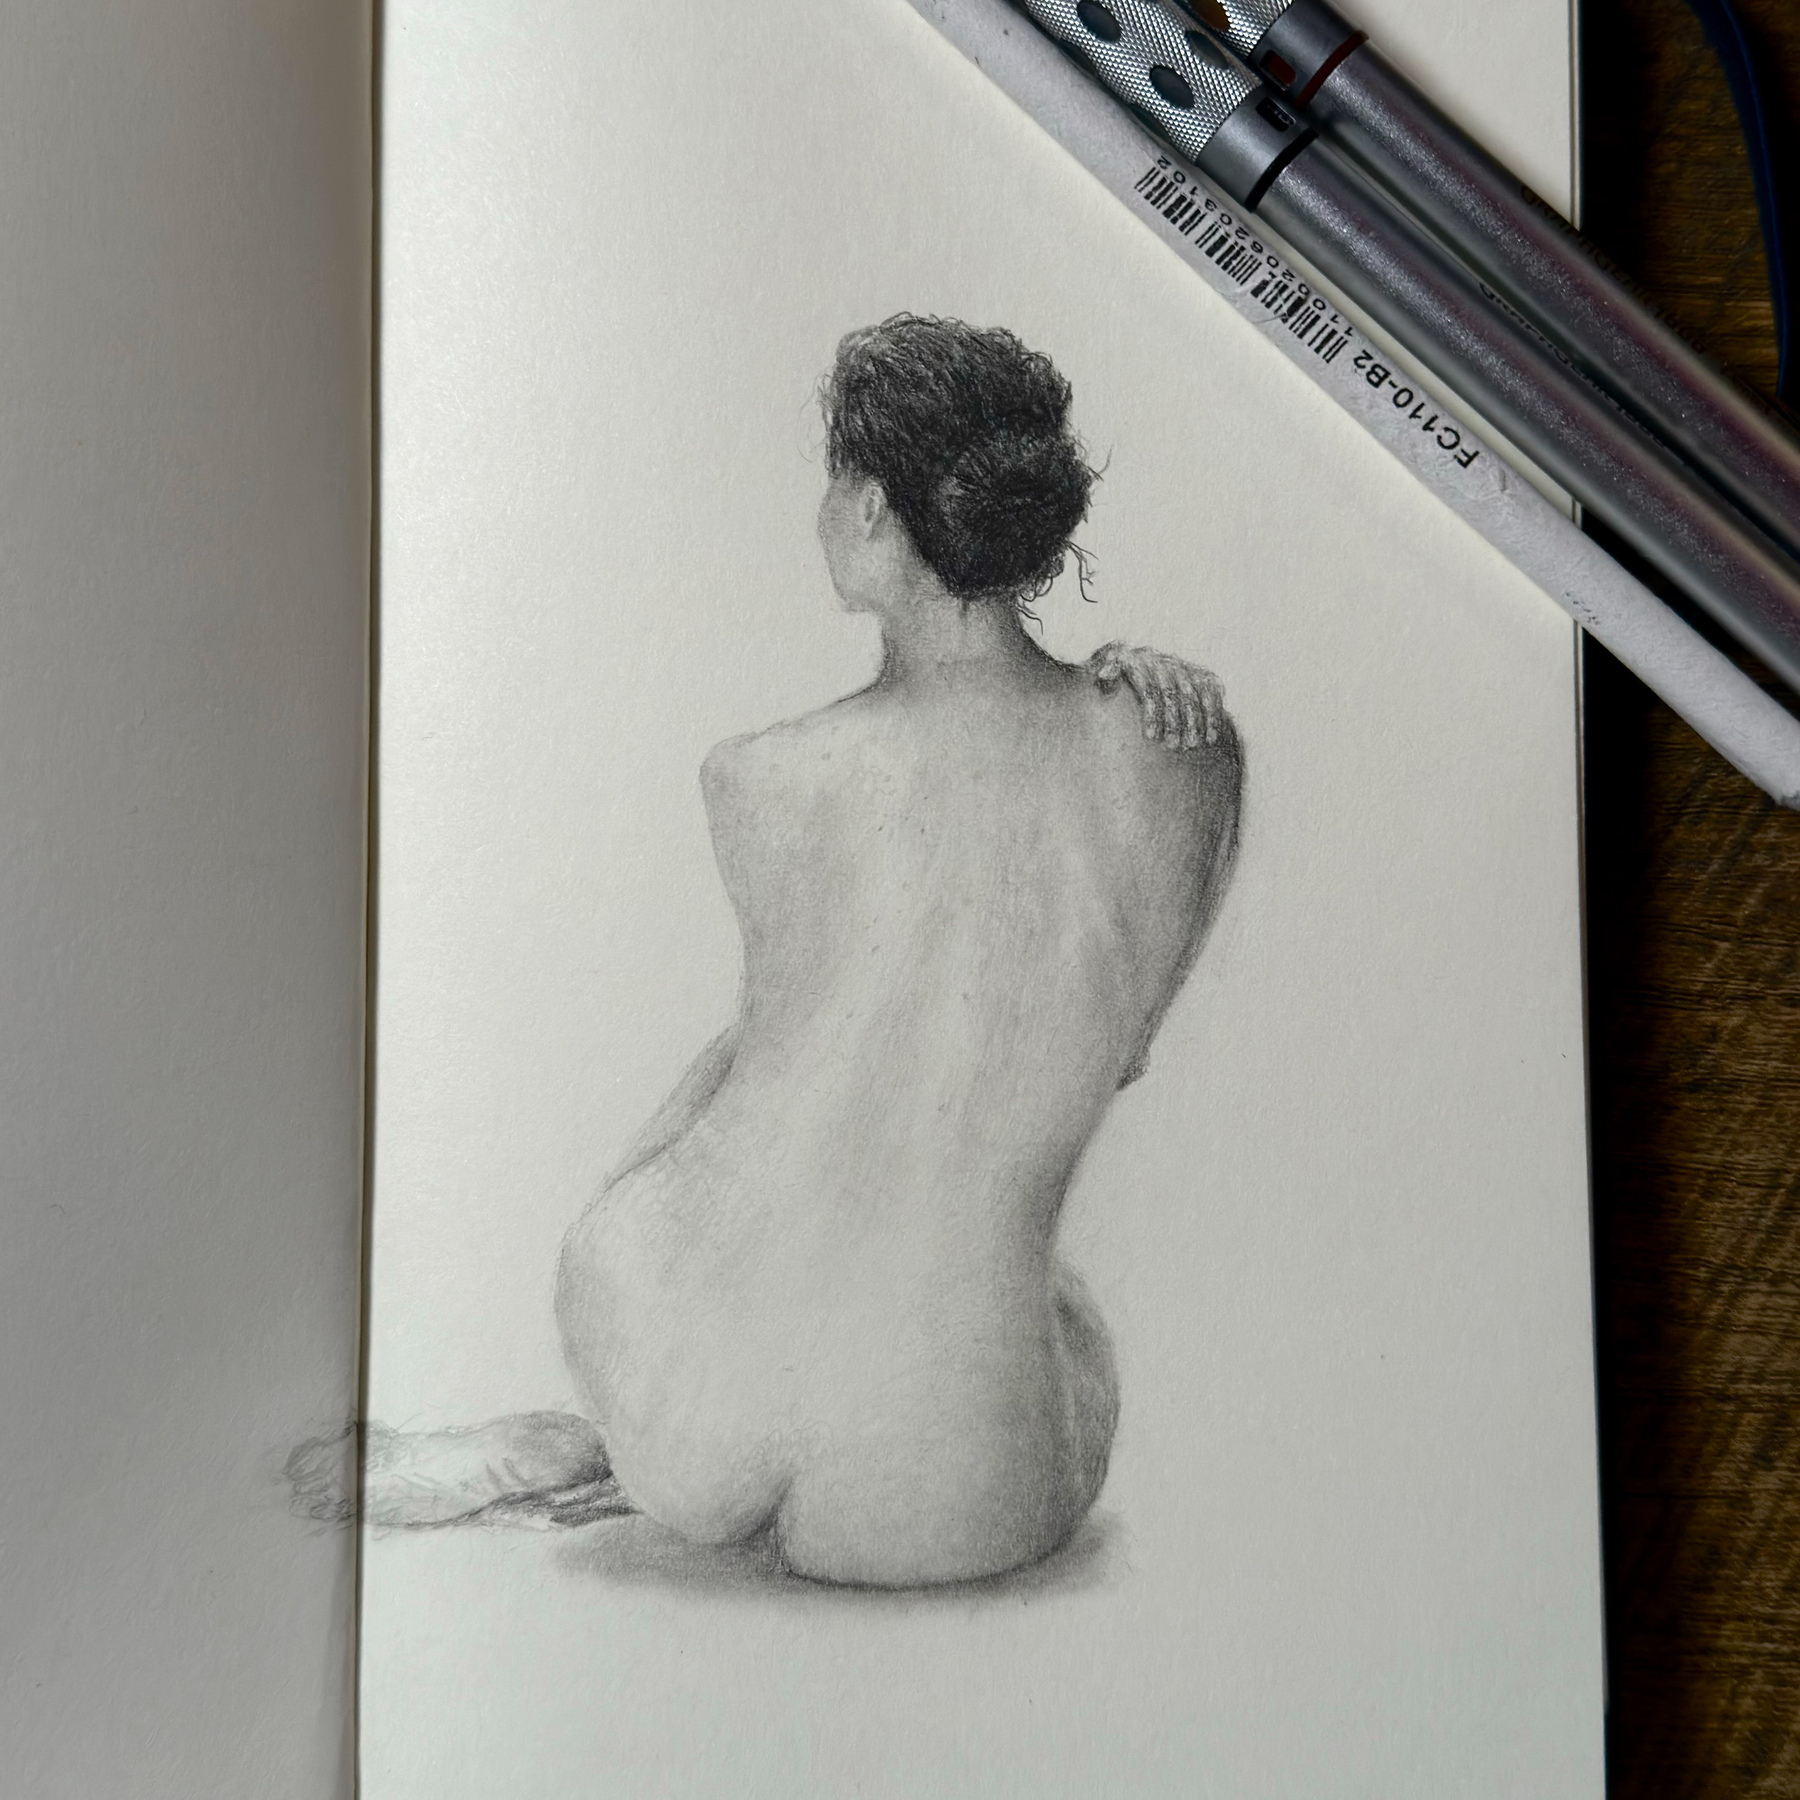 A pencil drawing of a woman's back, showing her seated with her knees pulled up, one hand resting on her shoulder. The focus is on the play of light and shadow over the curves of her back, hips, and bun-styled hair. Art materials are visible at the top right, suggesting an artist's workspace.